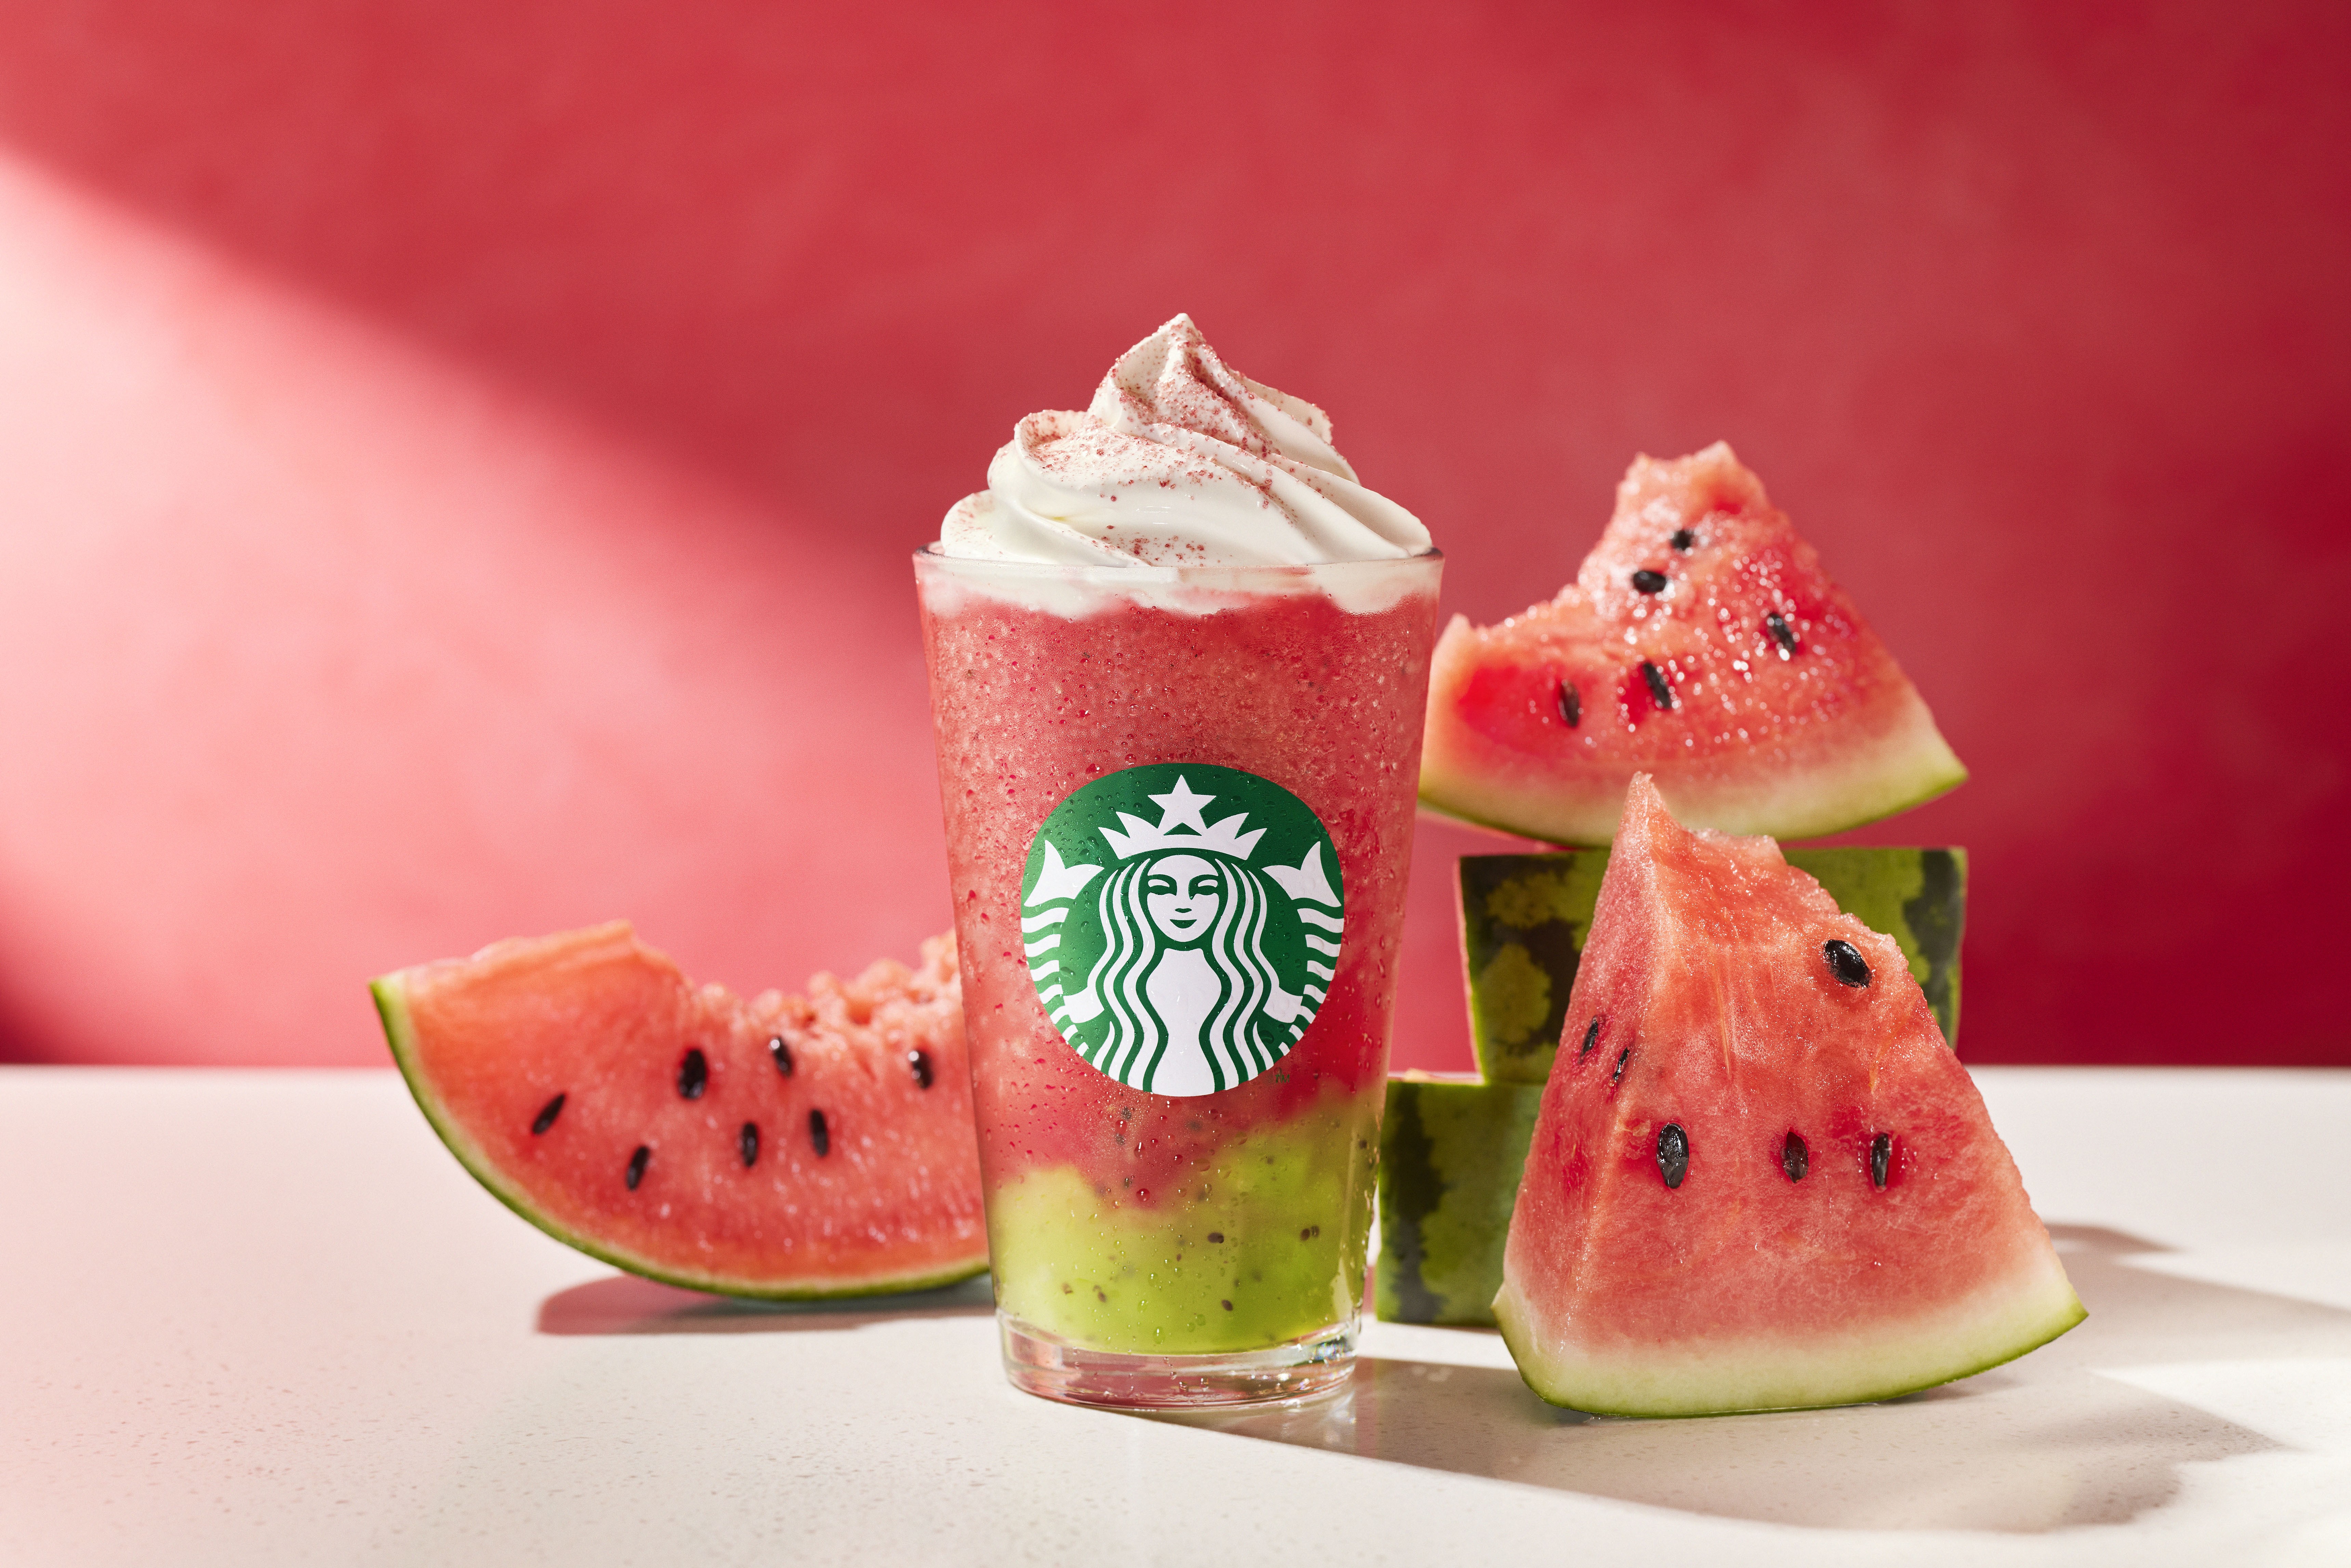 The first Frappuccino🄬 with watermelon flavor will arrive at Starbucks nationwide! As if taking a big bite out of a watermelon, full of fresh sweetness 『GABURI Watermelon Frappuccino🄬』 will be available from August 9th(Wed.)